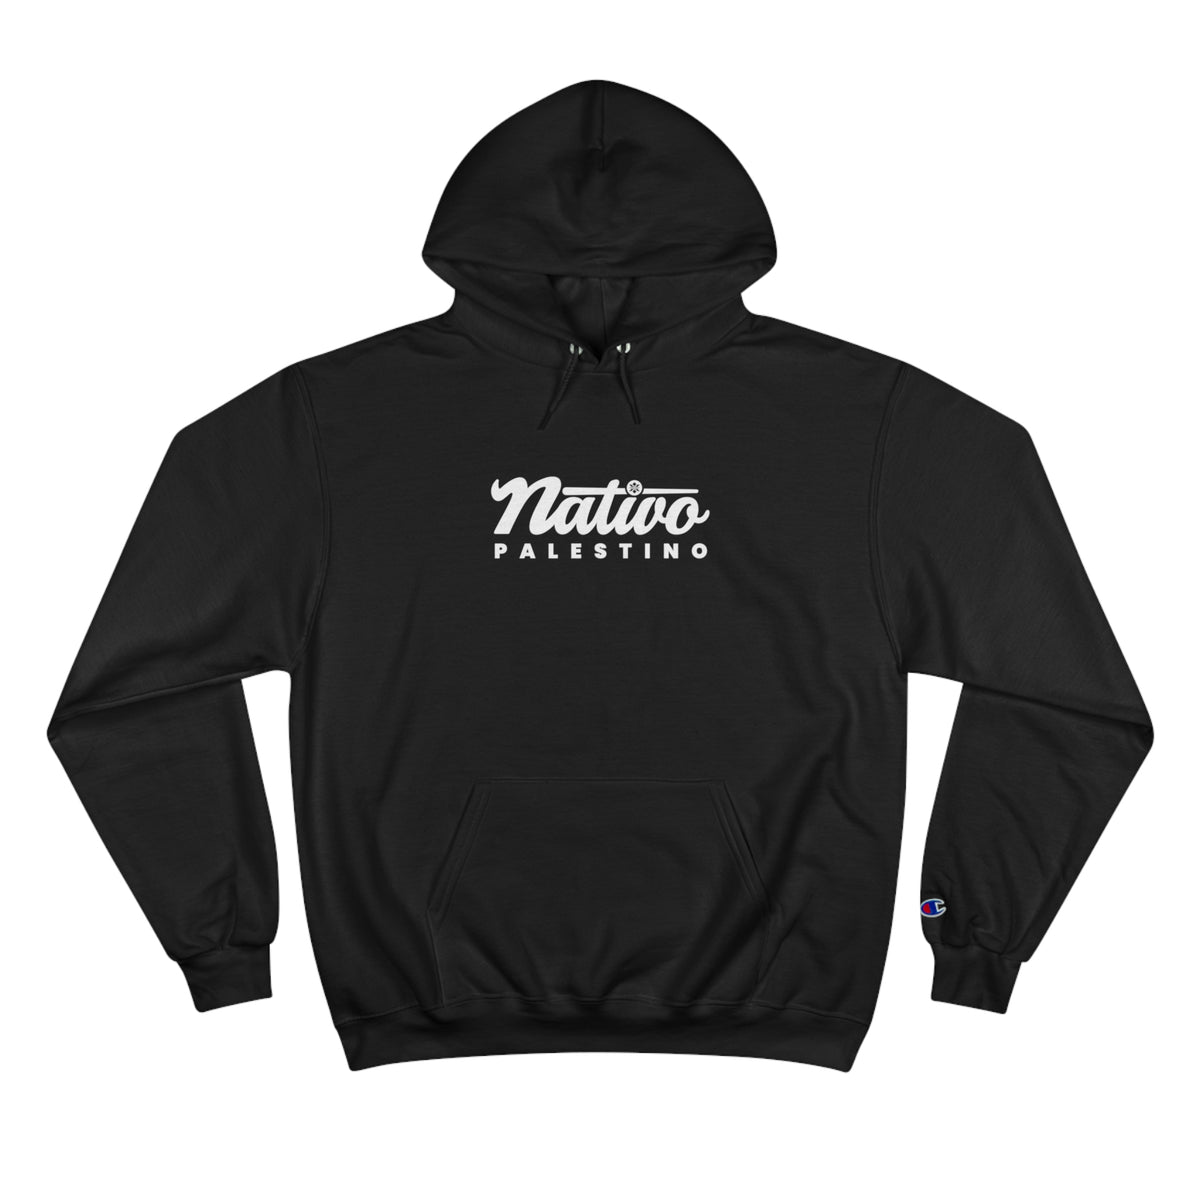 Palestine clothing store for justice